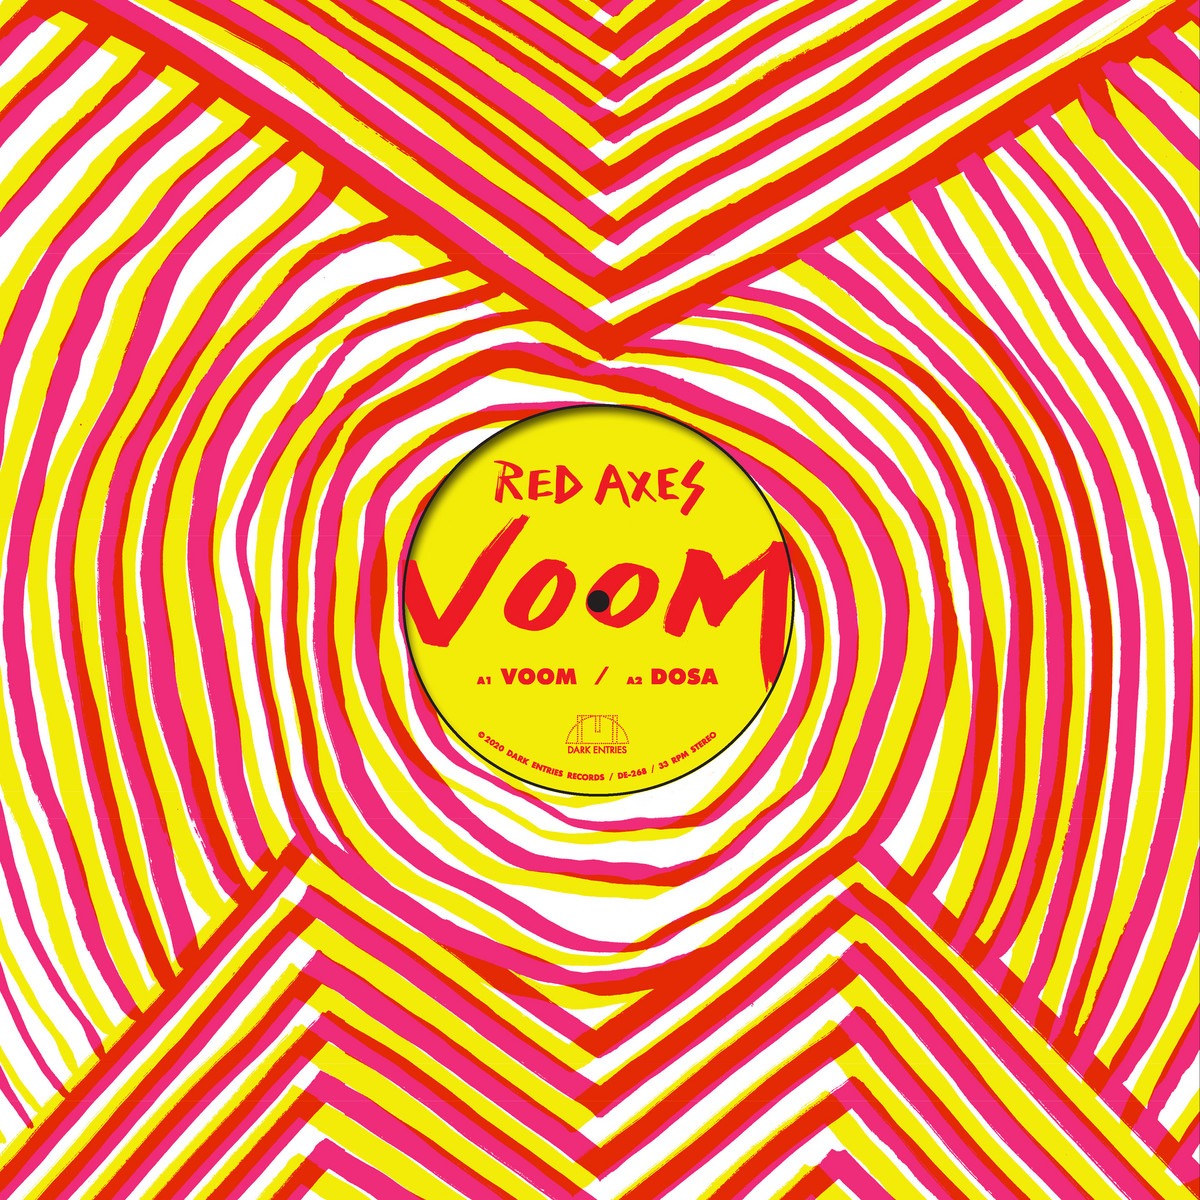 Red Axes_Voom_Dark Entries Records